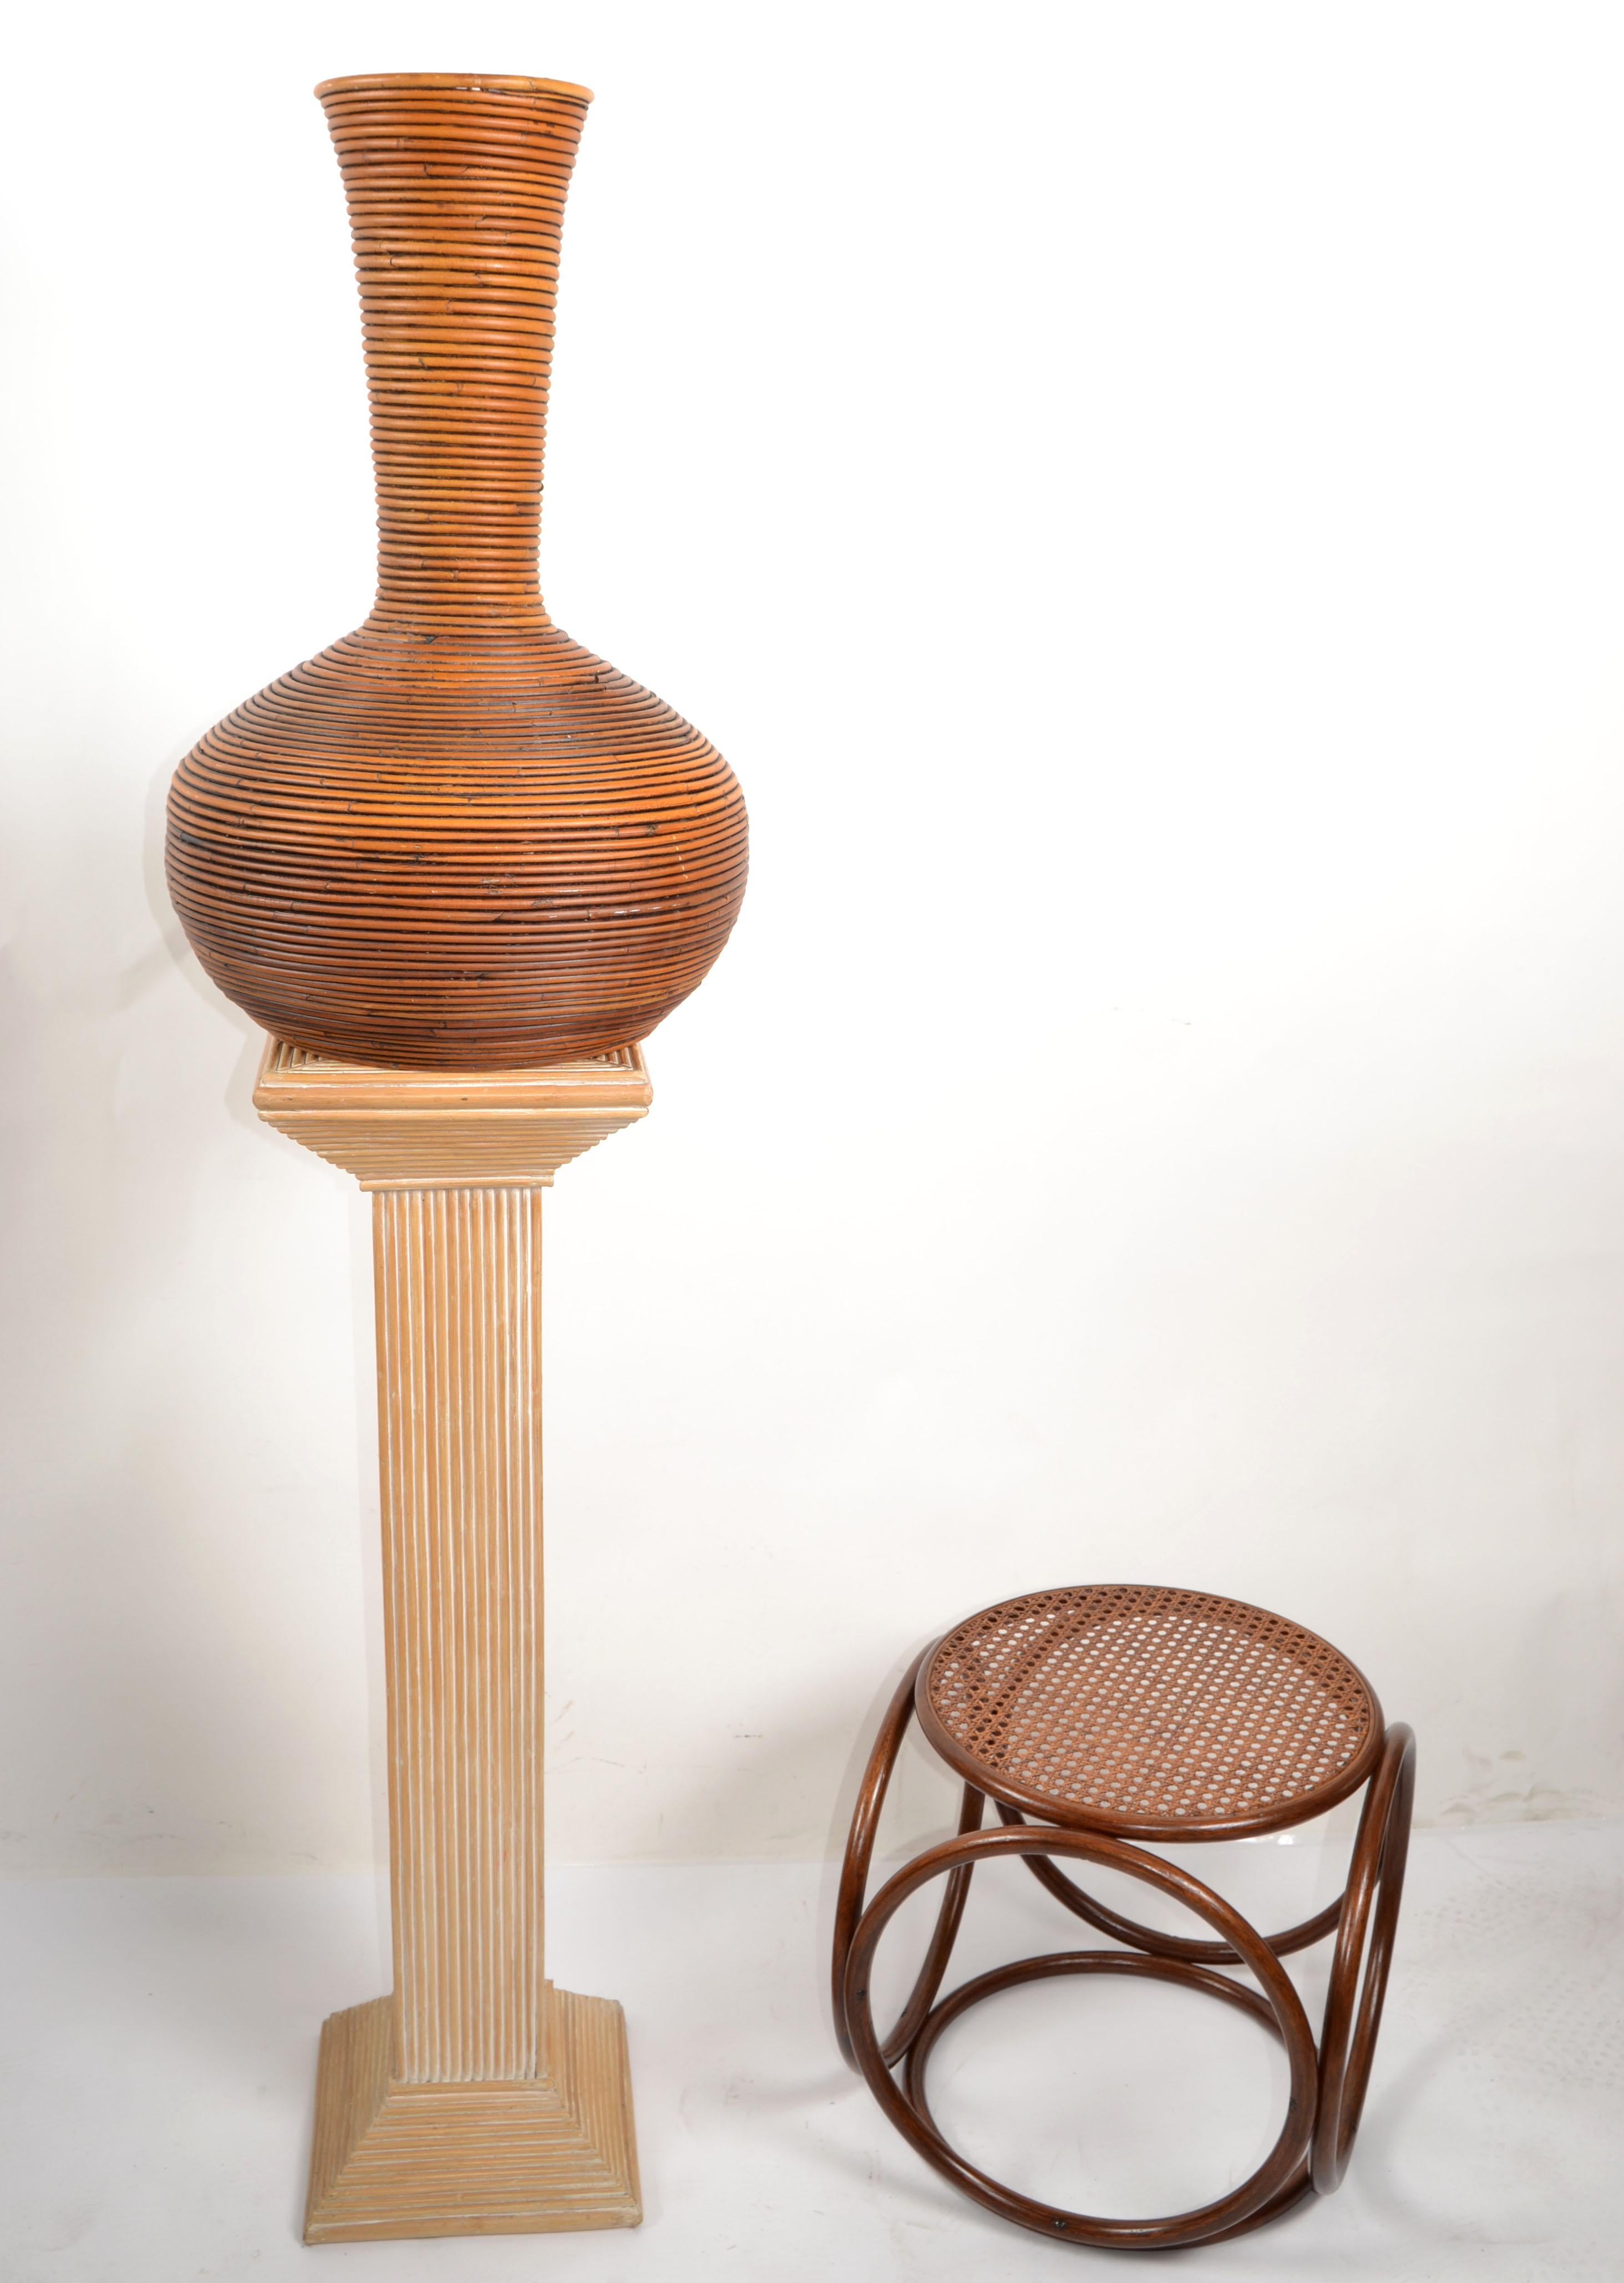 70s Tall Bohemian Brown Reed Cane Bamboo Handcrafted Tall Cone Shape Floor Vase  In Good Condition For Sale In Miami, FL